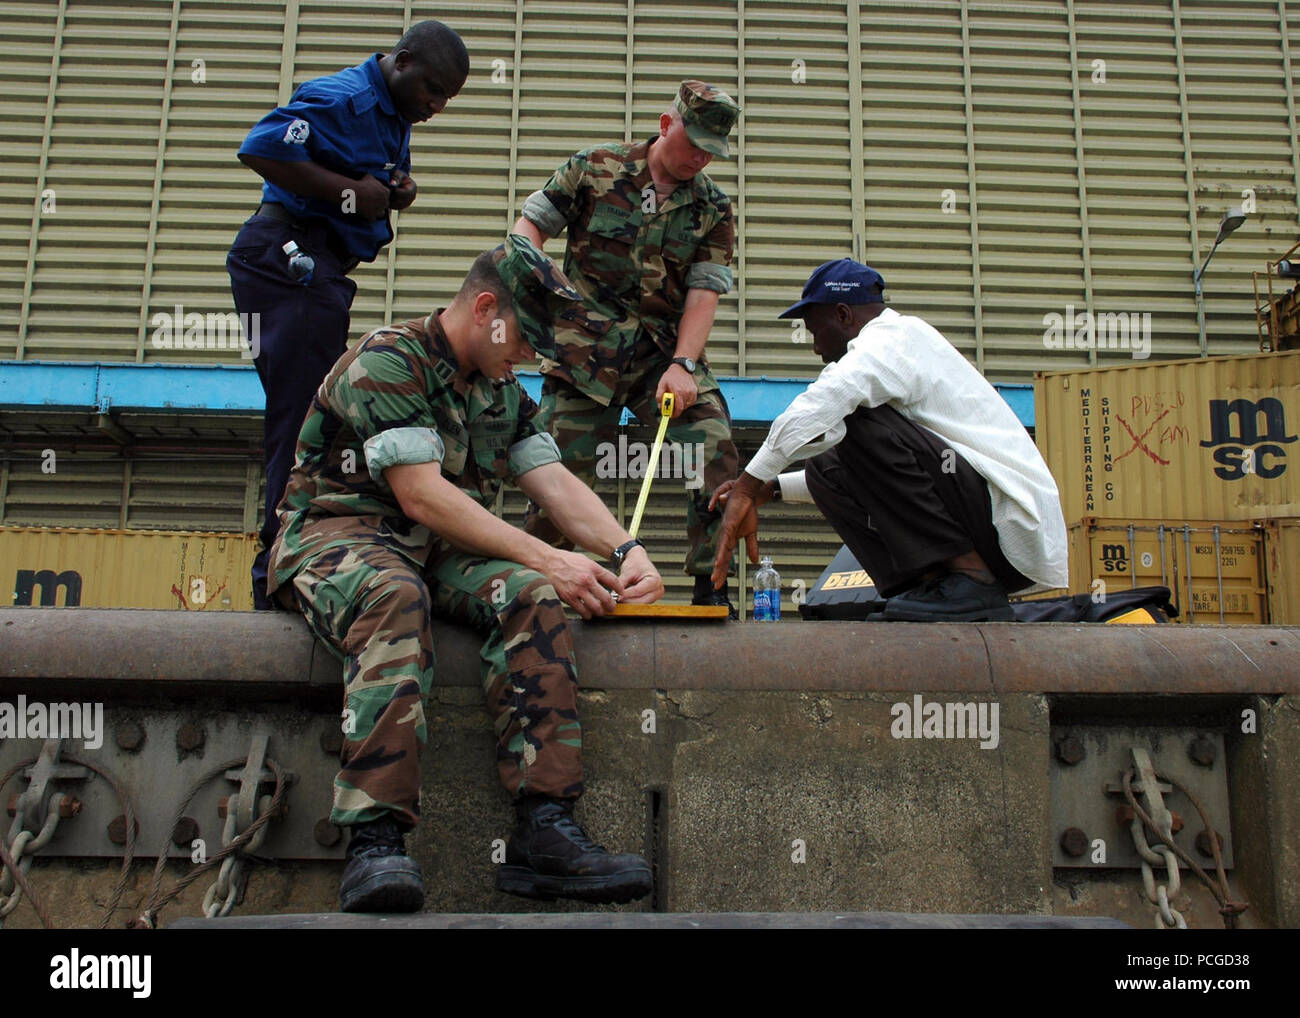 U.S. Navy Lt. Travis Clem, foreground, and Lt. David Trampp, center, both with the Fleet Survey Team, work with Nigerian sailors to construct a tide gauge as part of a cooperative hydrographic survey March 19, 2009, in Lagos, Nigeria, during Africa Partnership Station (APS) 2009. APS is an international security cooperation initiative facilitated by Commander, U.S. Naval Forces Europe-Africa aimed at strengthening global maritime partnerships through training and collaborative activities in order to improve maritime safety and security in Africa. Stock Photo